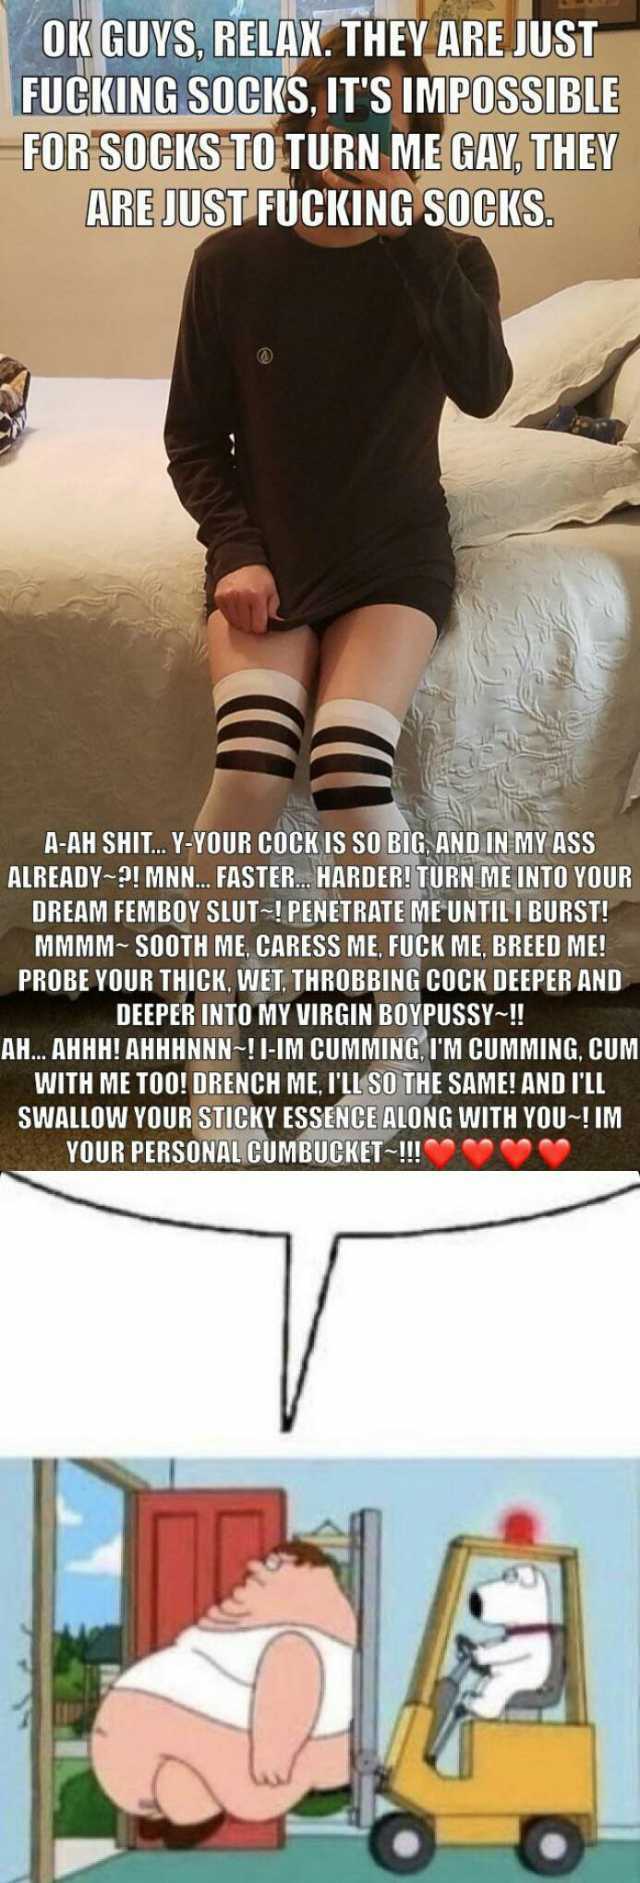 OK GUYS RELAK. THEY ARE JUST FUCKING SOCKS ITS IMPOSSIBIE FOR SOCKS TO TURN ME GAY THEY ARE JUSTFUCKING S0CKS. A-AH SHIT.Y-YOUR COCK IS SO BIG ANDIN MY ASS ALREADY-! MNN.. FASTER HARDER! TURN MEINTO YOUR DREAM FEMBOY SLUT-! PENETR